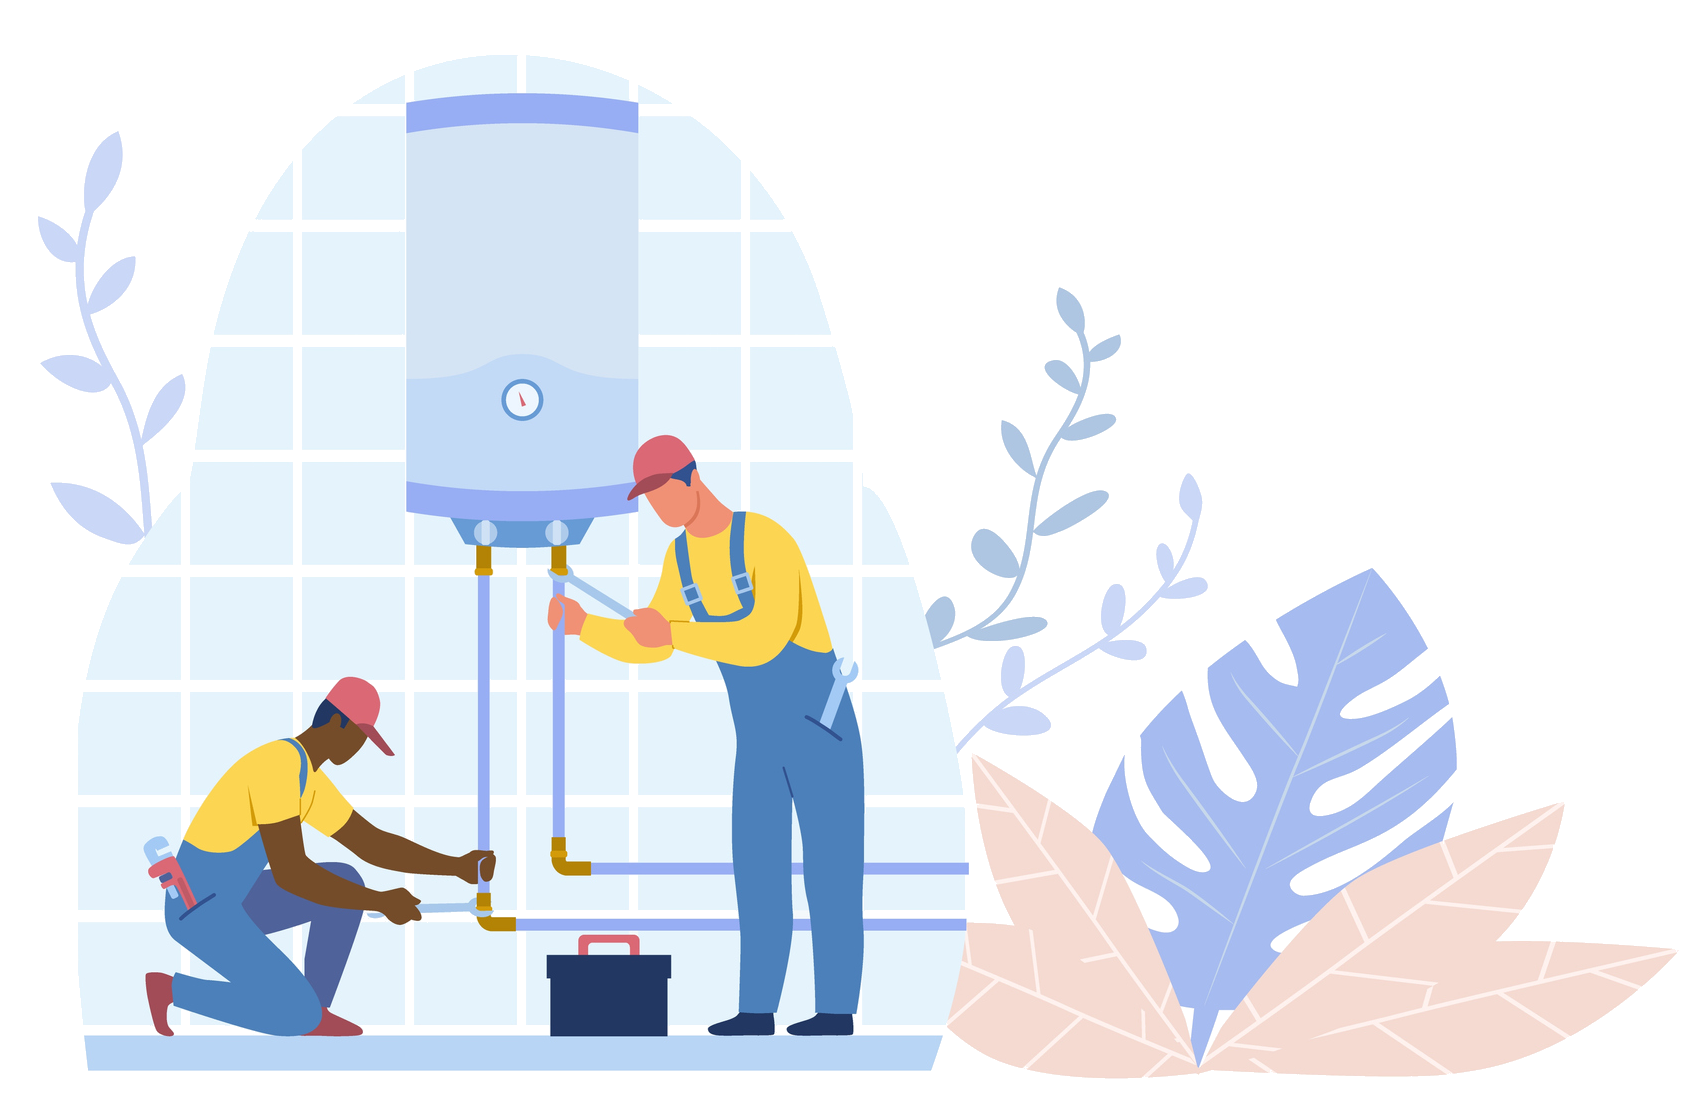 People fixing pipes coming out of a boiler in a nice friendly envionment with plants around